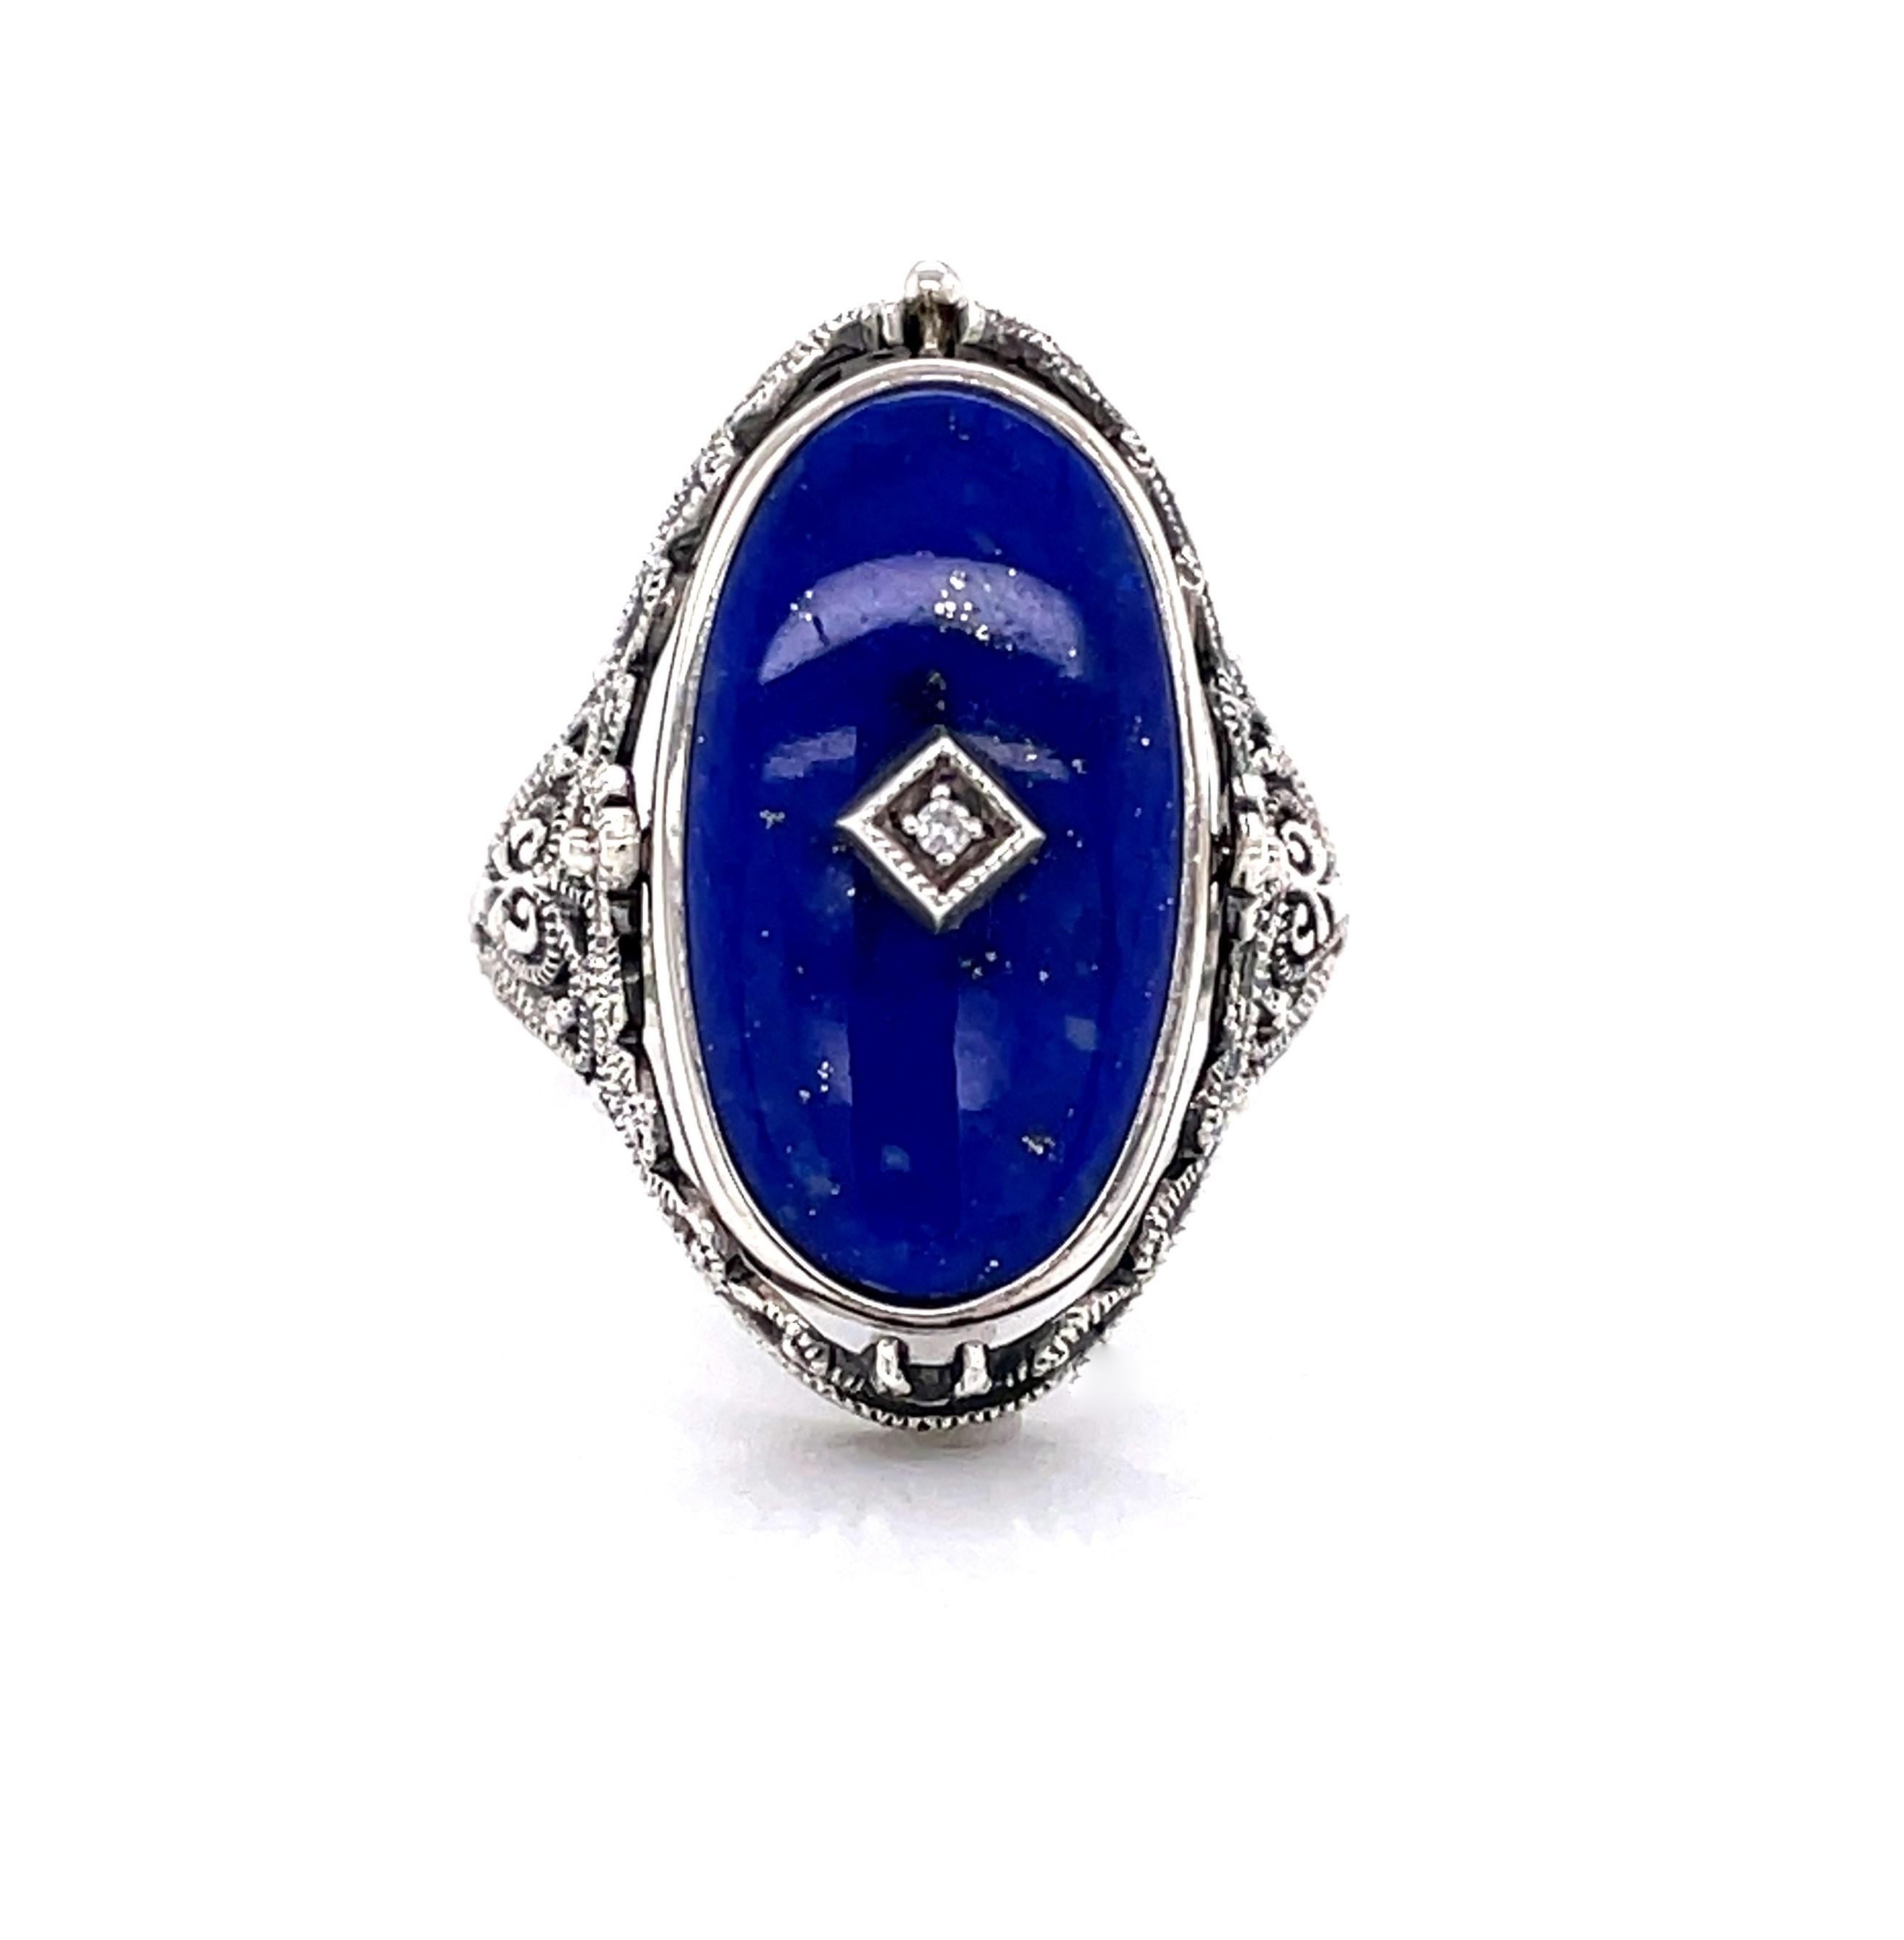 Polished vivid blue natural lapis highlighted with a diamond accent is the bold face of this Victorian Style sterling silver oval flip ring. With a flip of the head, a glossy black onyx stone can be display. Crafted of toned sterling silver with